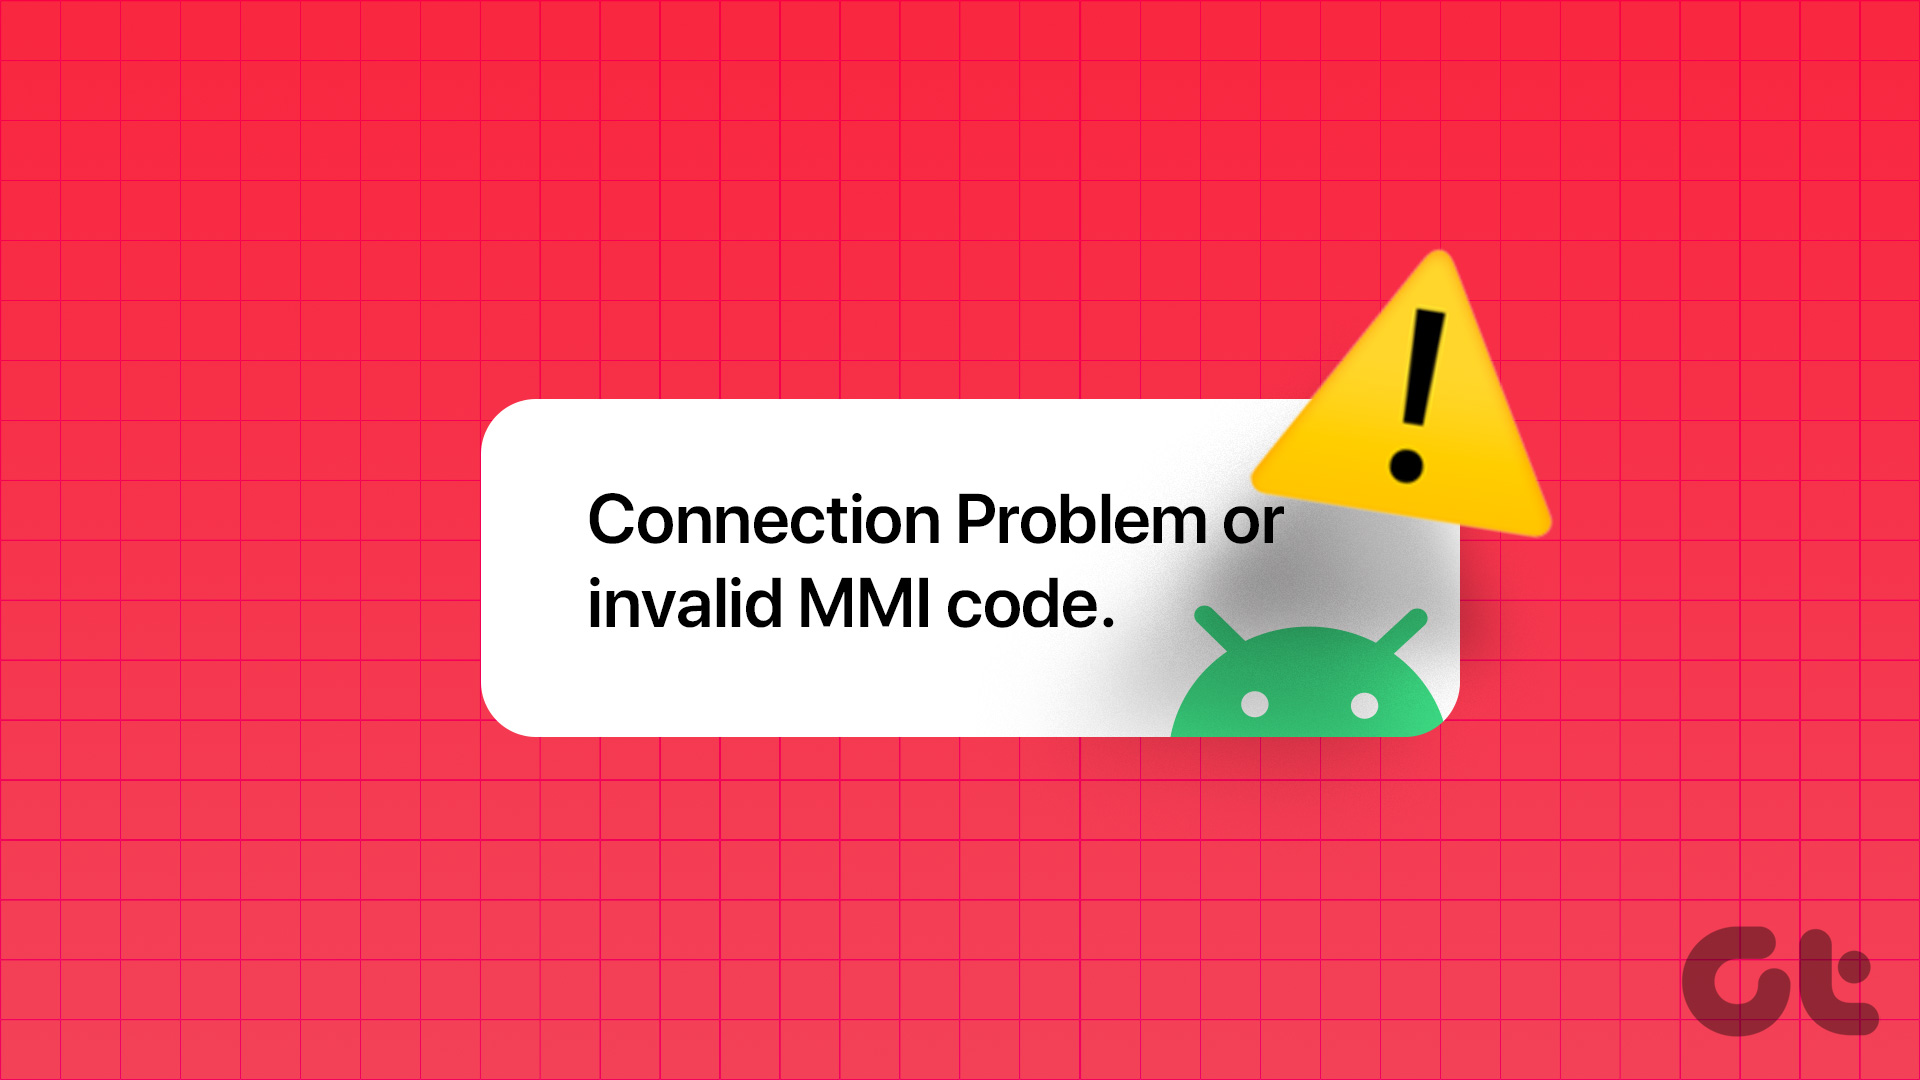 Top Fixes for 'Connection Problem or Invalid MMI Code' Error on Android